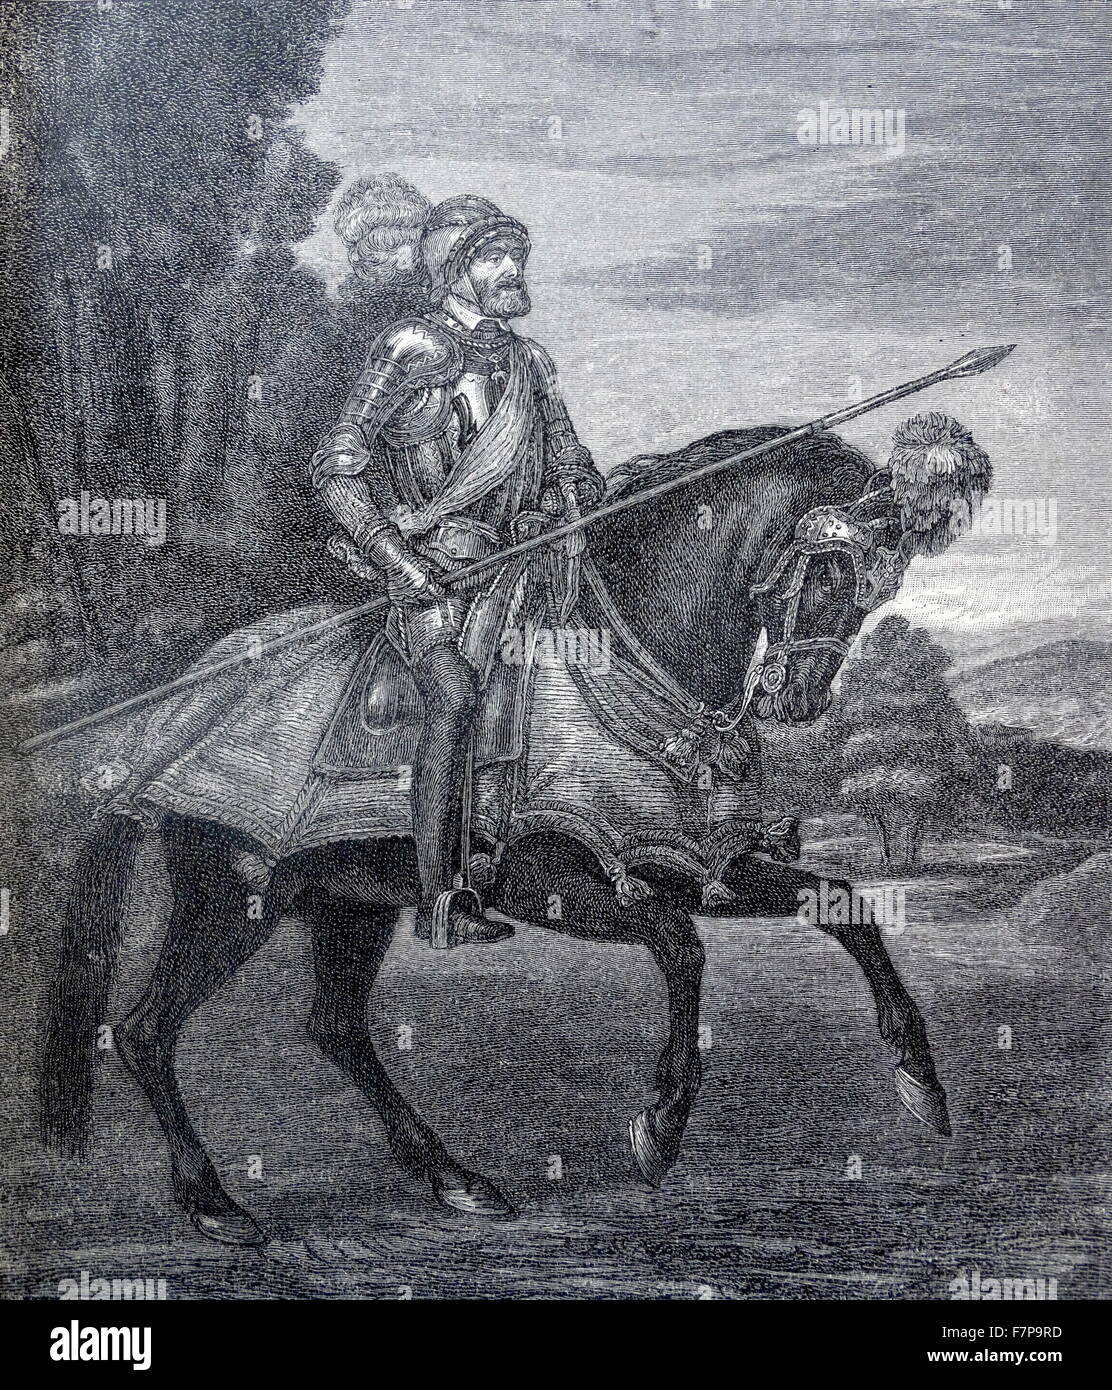 Charles V also known as Charles I (Carlos I) (1500 – 1558), King of Spain and Emperor of the Spanish Empire from 1516. later, as Charles V he was ruler of the Holy Roman Empire from 1519 until 1556.Charles V on Horseback in Mühlberg by Titian. 1548 Stock Photo